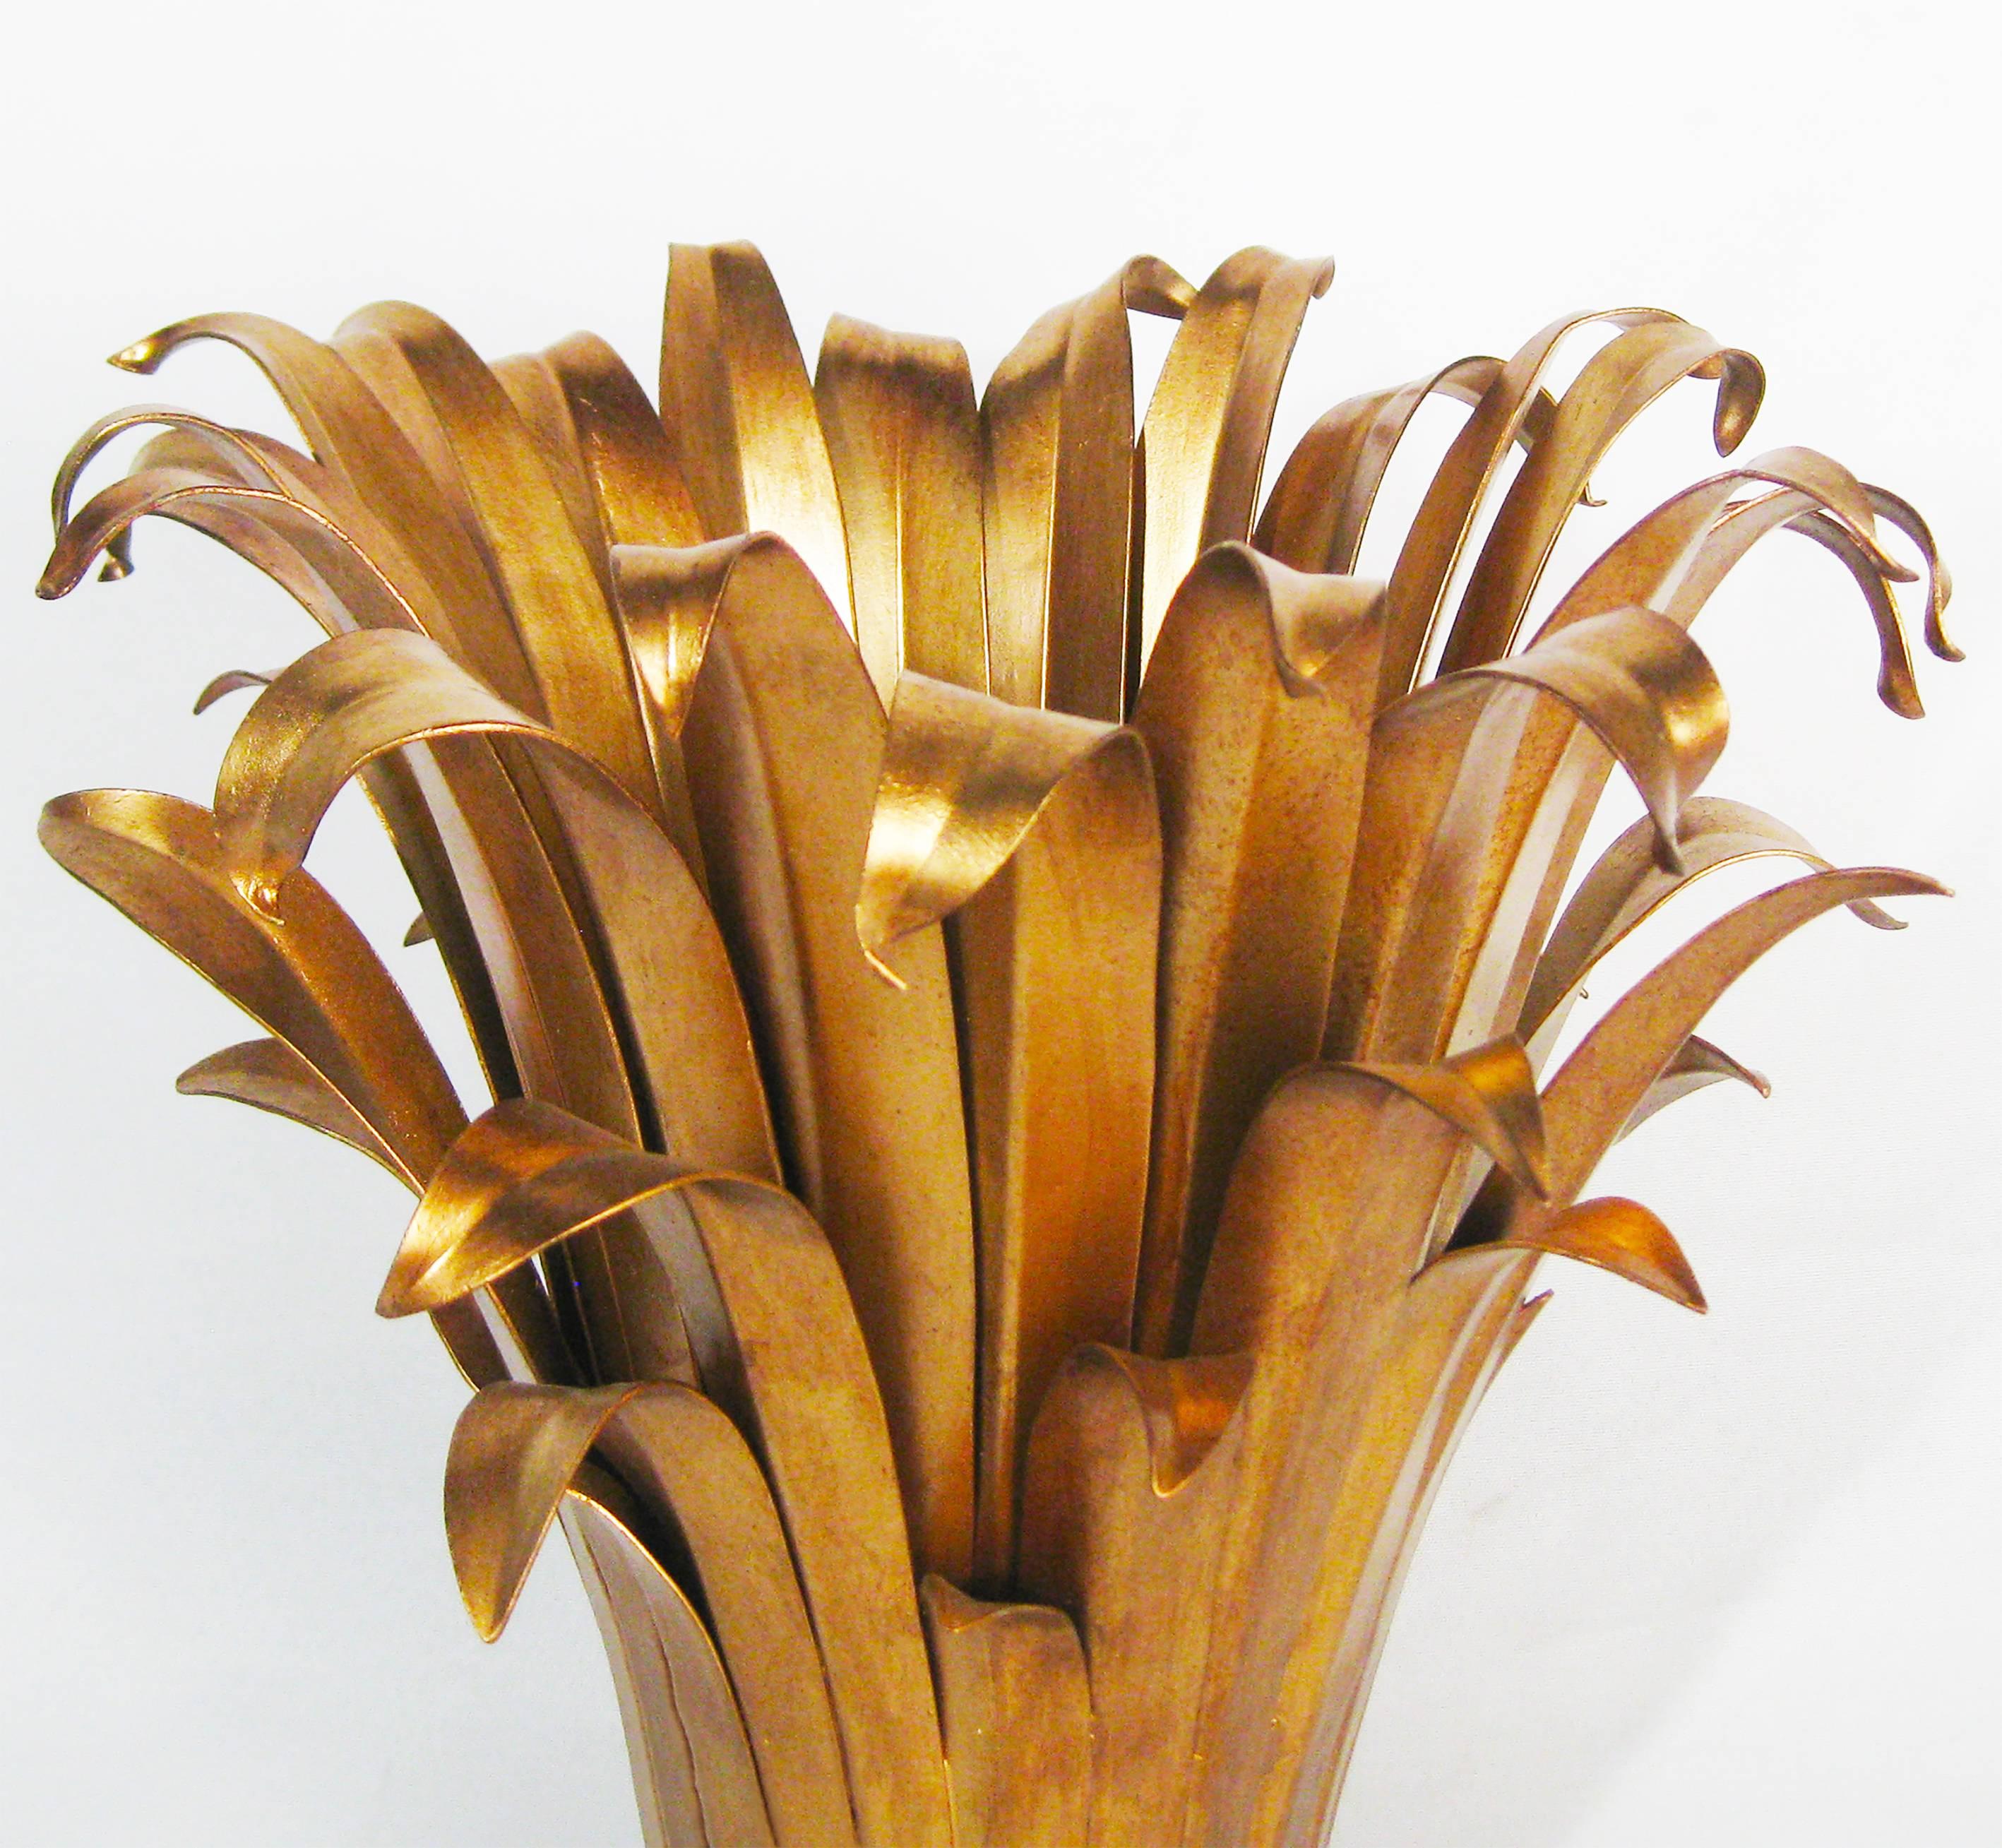 A gilded table lamp of delicately patinated metals that depicts pandanus leaves (or the like!) bound by ribbon. The subtle, textured effect of the light's reflection as it passes out through these layered golden blades is lovely and pure